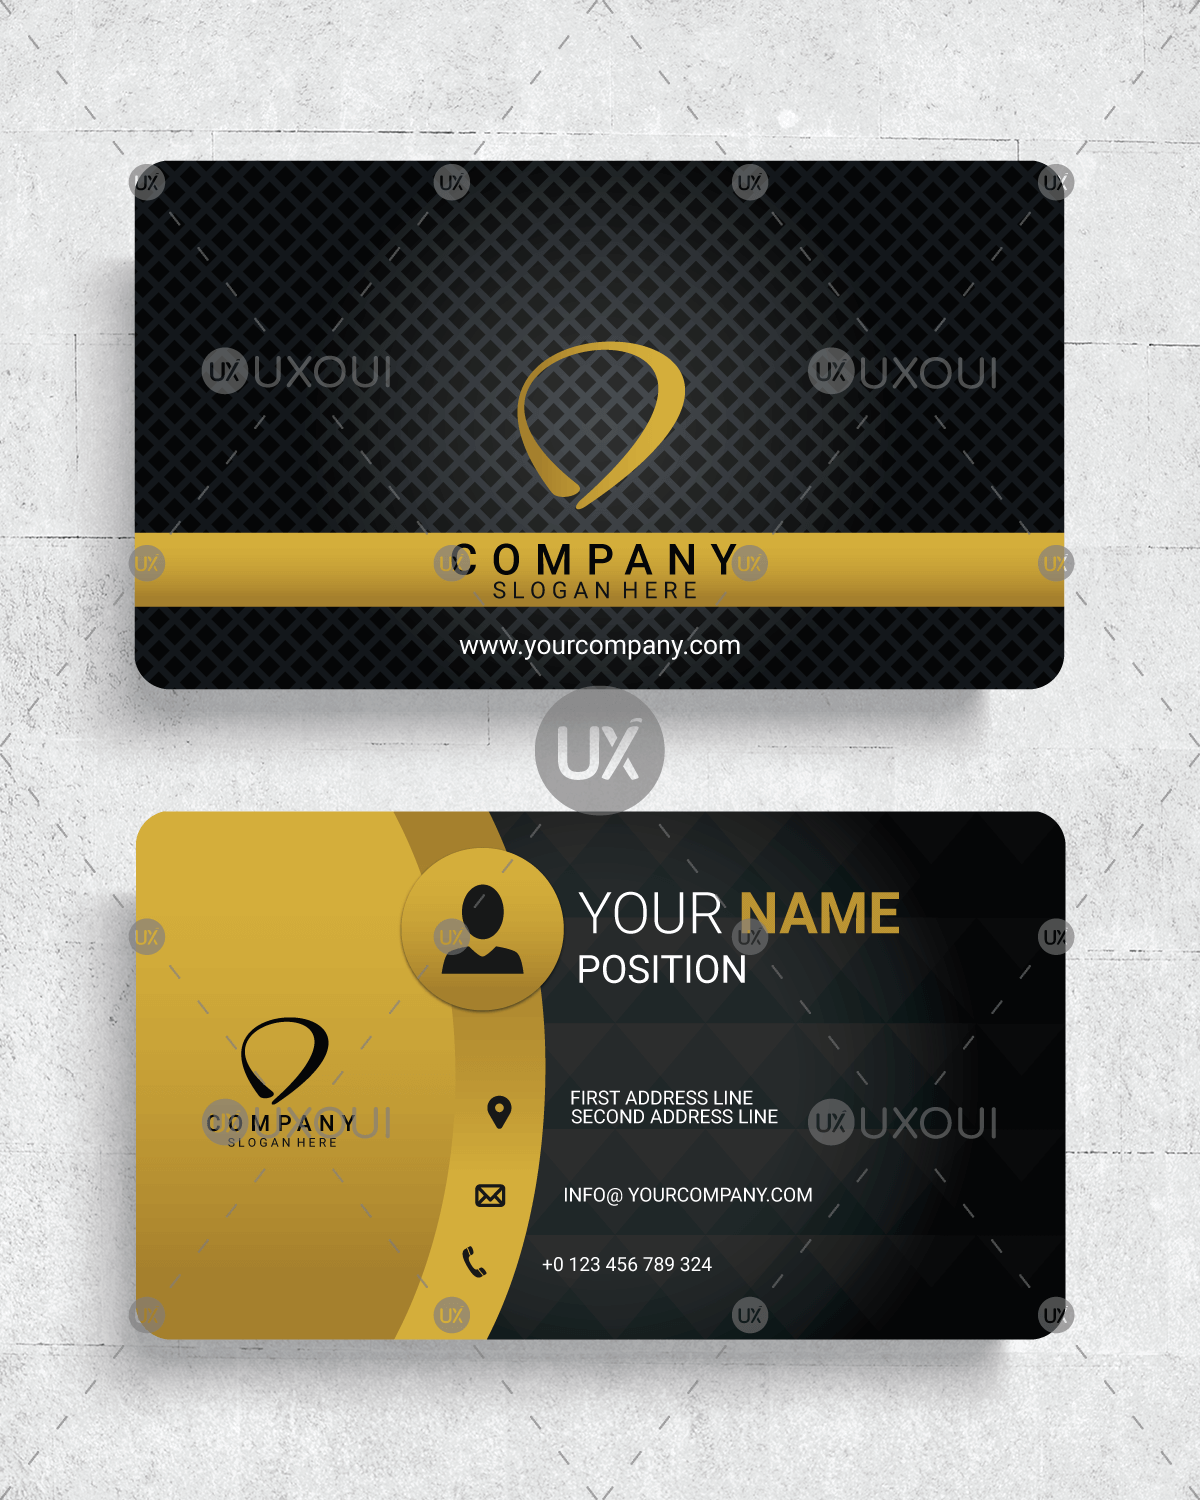 Black and Yellow Company Logo - Premium luxury Business Card Design Template vector with black